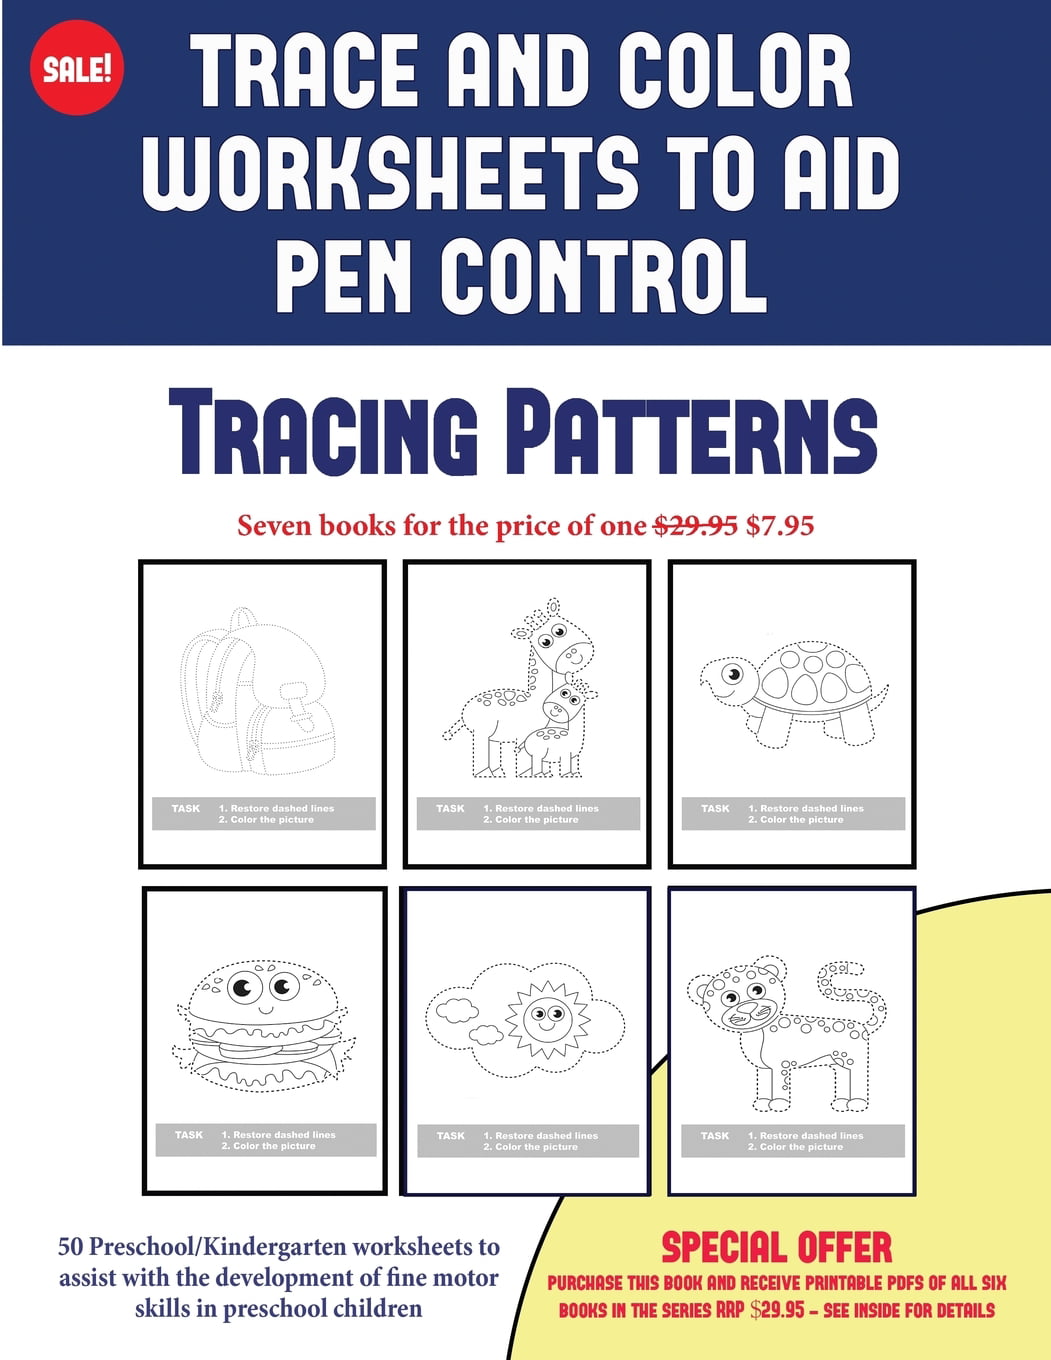 50 sheets tracing paper. Use tracing paper to trace images from a coloring  book or children's book. A fun way to trace lines, this activity helps  strengthen fine motor control and pencil